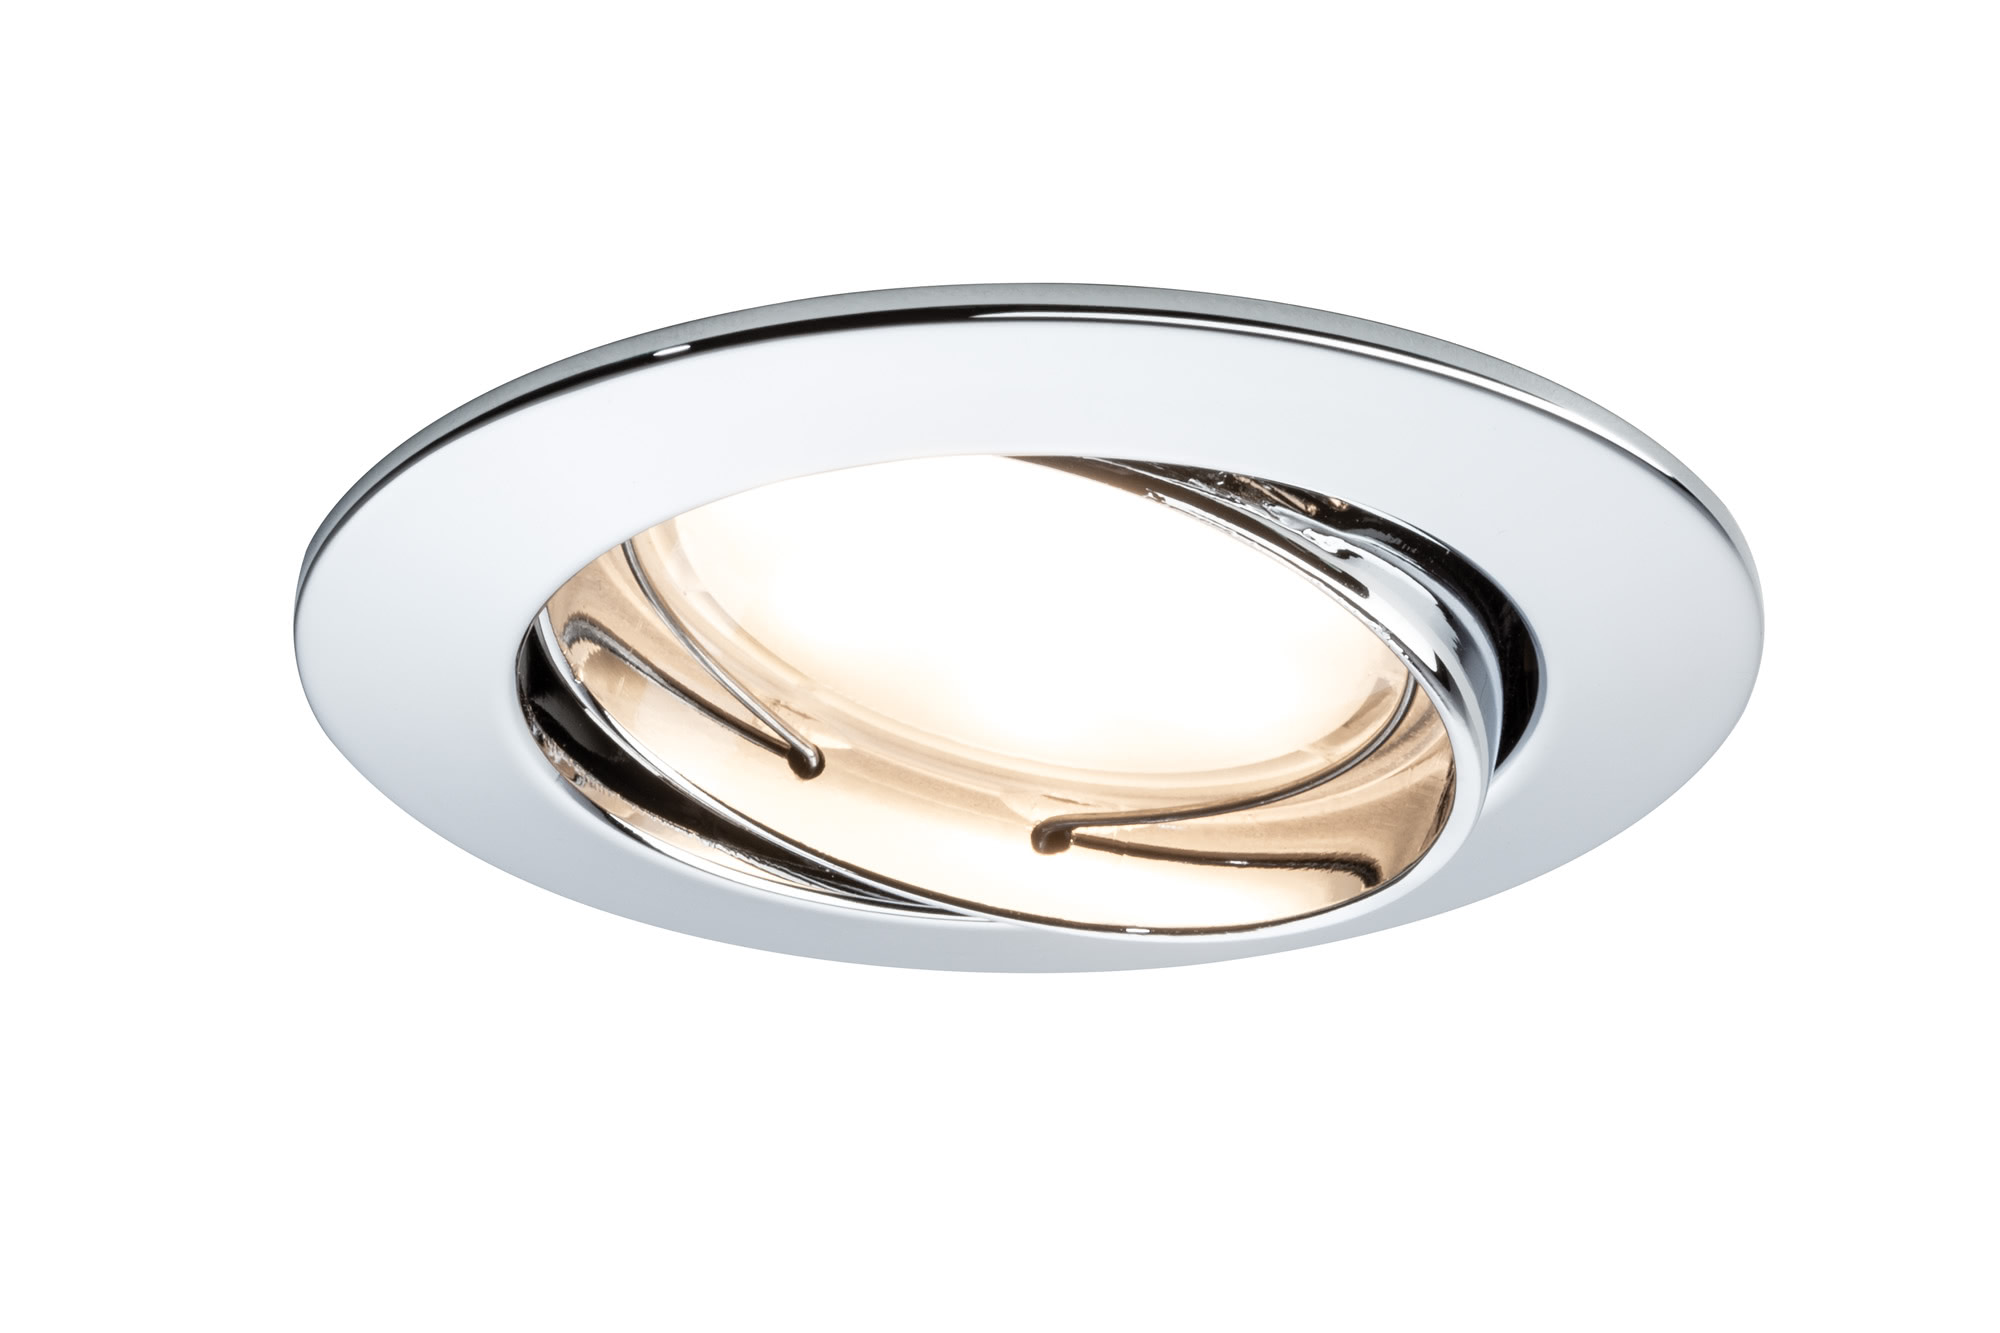 92779 EBL Coin LED 3x6,5W 51mm sat schw Chrom The Coins are innovative and user-friendly recessed spotlights that are suitable for new installations as well as replacing existing installations. Since they are exceptionally flat, they can be installed in ceilings with a cavity of only 30 to 35В millimetres. From 50В centimetres to 5В metres or more вЂ“ you determine the spacing between the lights! The simple and tool-free linking of single luminaires using quick clips save more than just time and stress вЂ“ thanks to energy-efficient LED technology with very lower power consumption, the Coins are also easy on the wallet. 927.79 Paulmann